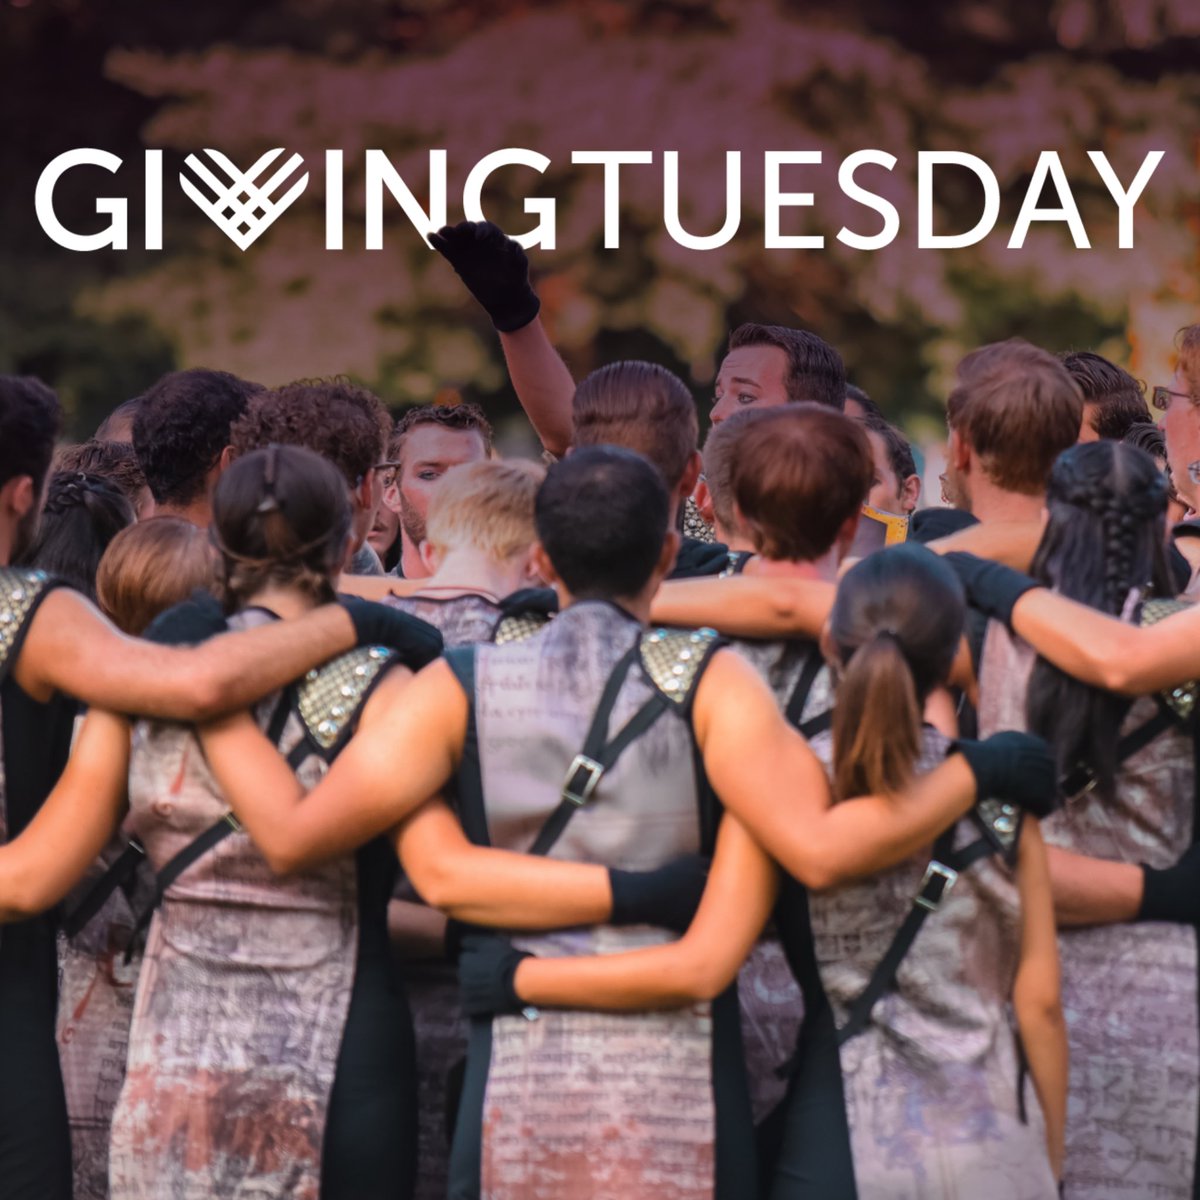 Giving Tuesday is going strong and we are $3,414 away from our goal as of 6pm EST 🤩 𝐍𝐨 𝐝𝐨𝐧𝐚𝐭𝐢𝐨𝐧 𝐢𝐬 𝐭𝐨𝐨 𝐬𝐦𝐚𝐥𝐥 💜 Even sharing our posts will help show your support for Carolina Crown! To donate, visit our campaign page: ➡️ facebook.com/donate/1868948…